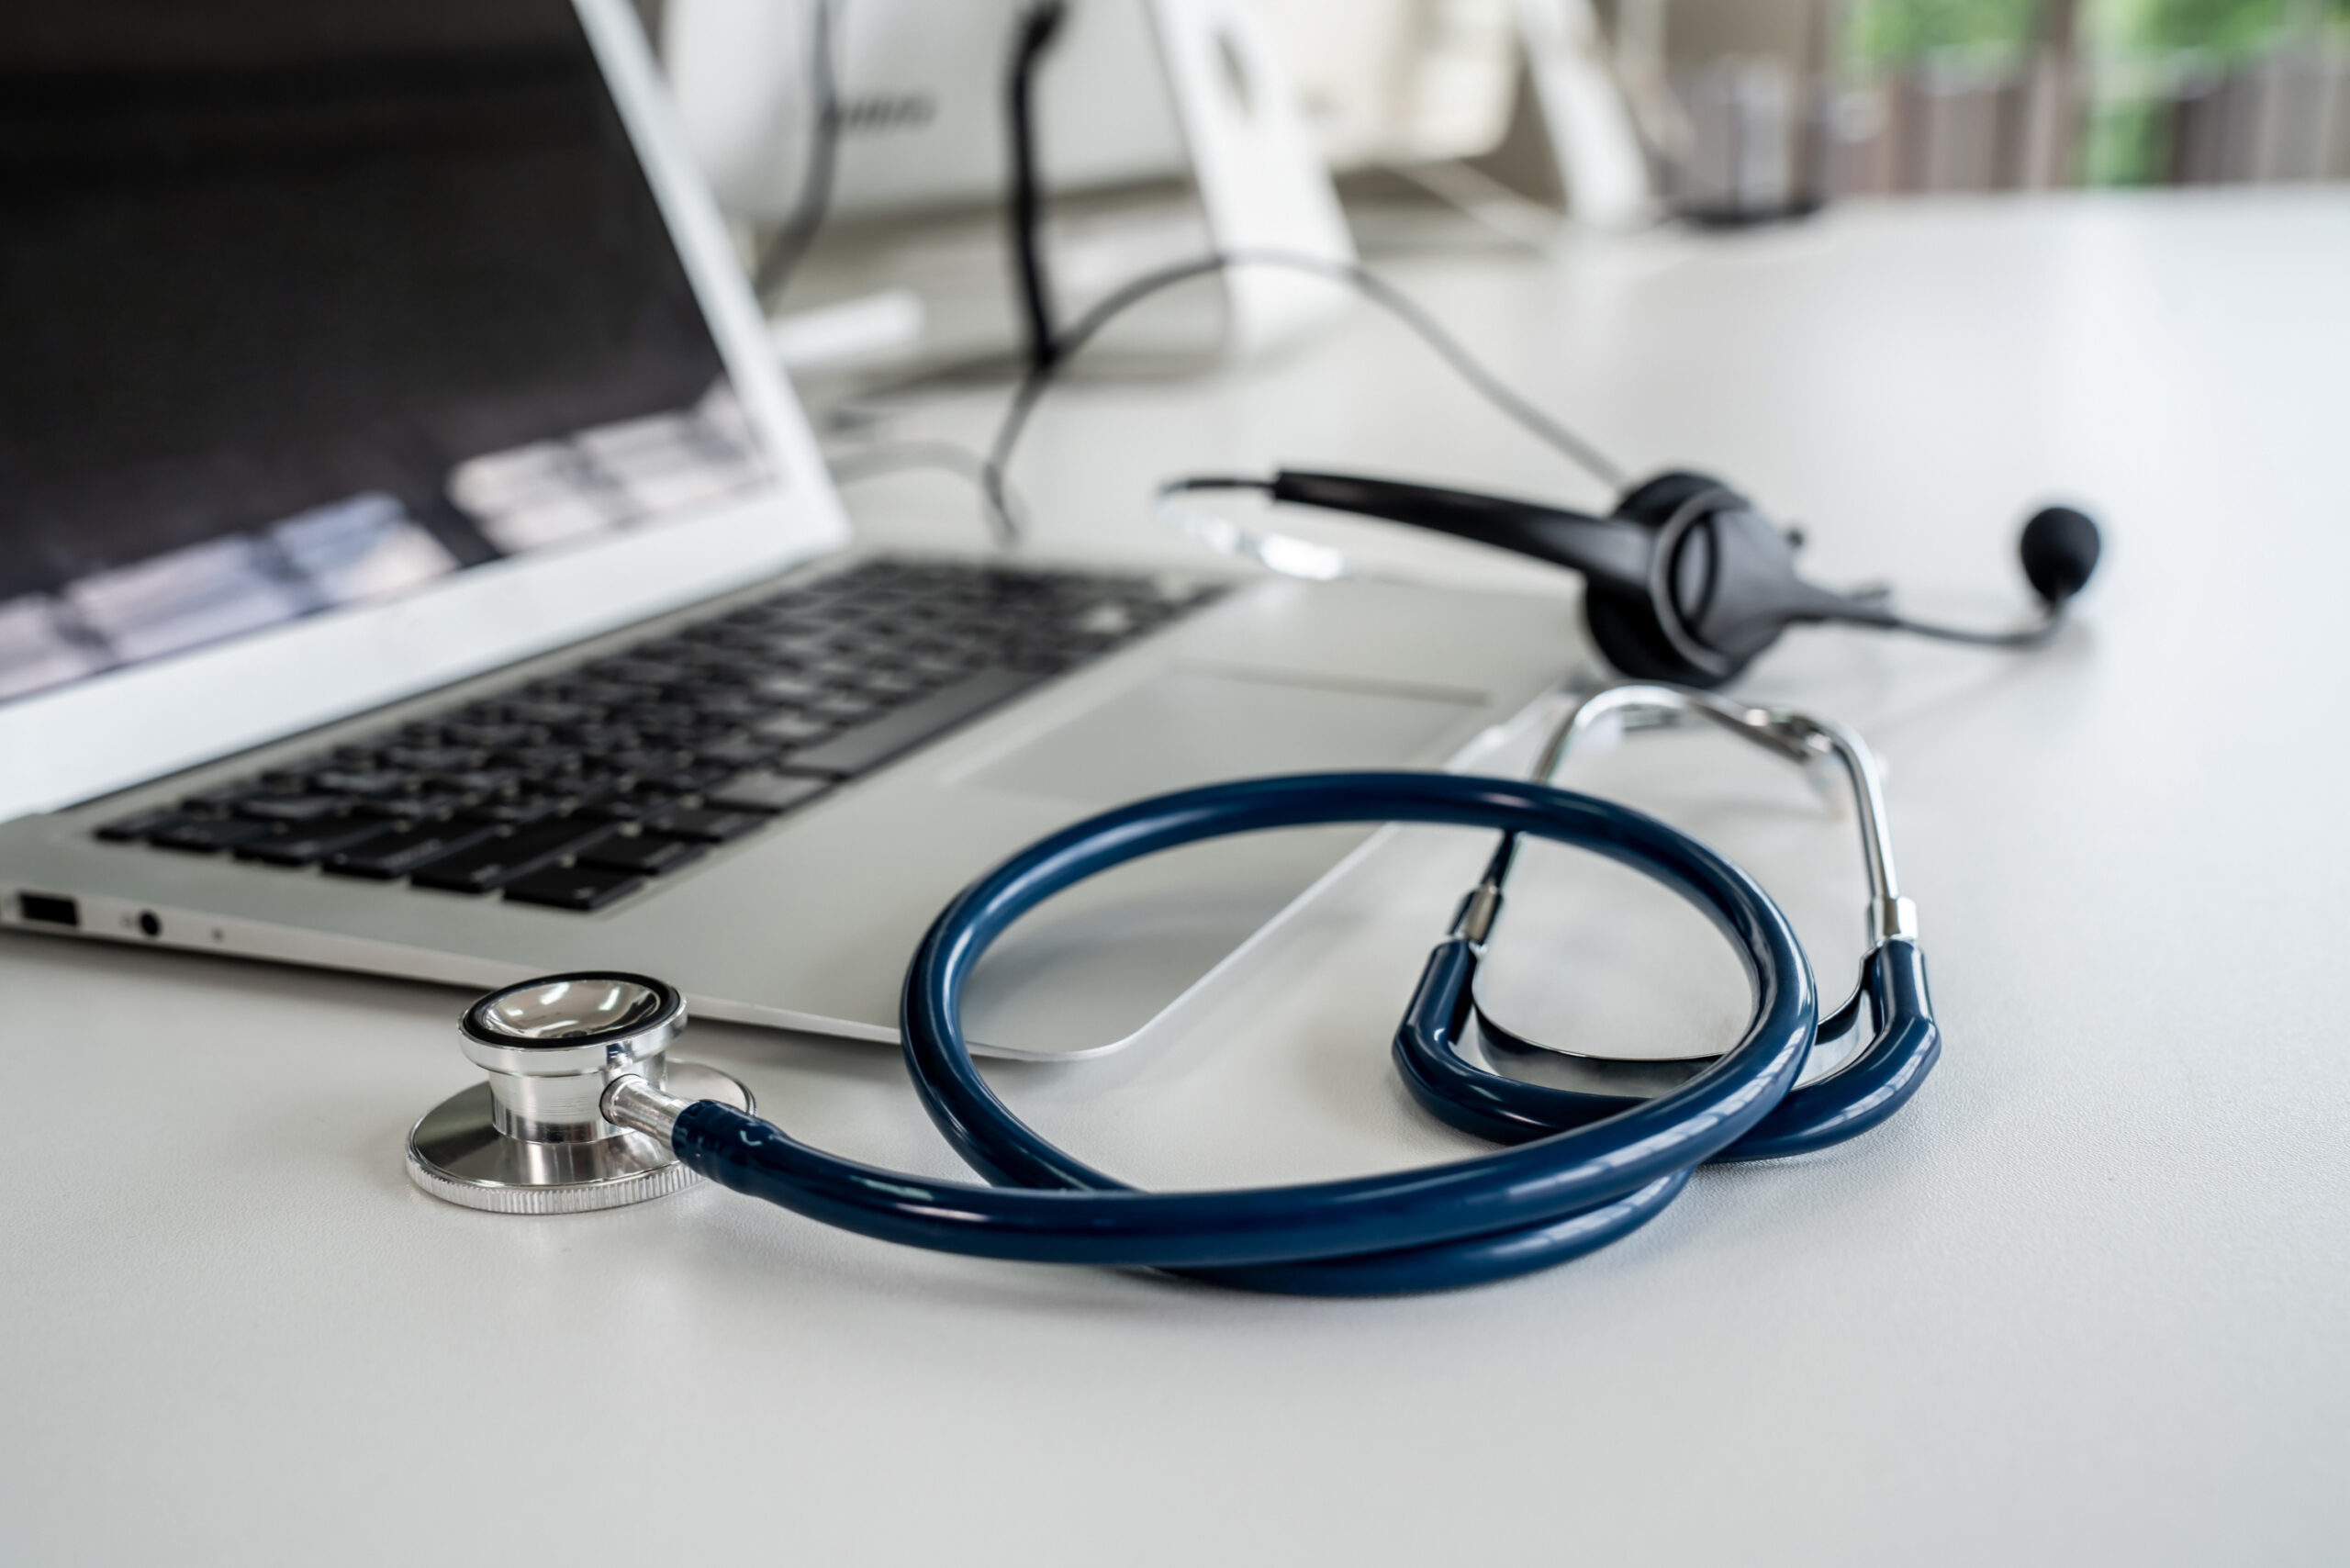 ASO concept: a laptop is positioned between a phone headset and a stethoscope, symbolizing how AI software can help Answering Service Operators relay accurate messages to providers.